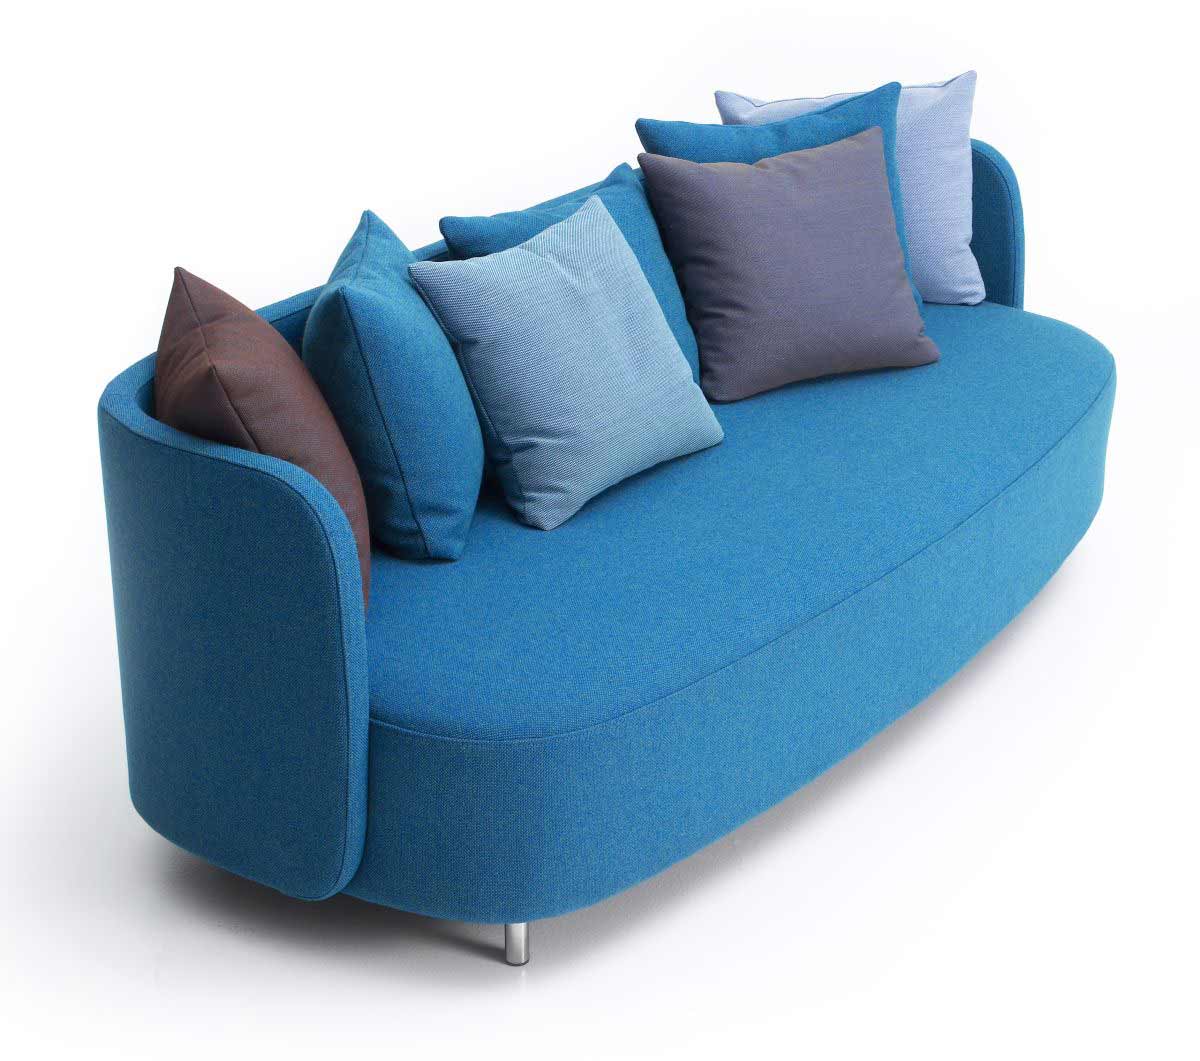 Innovative Couches For The Living Room Living Room Design Ideas